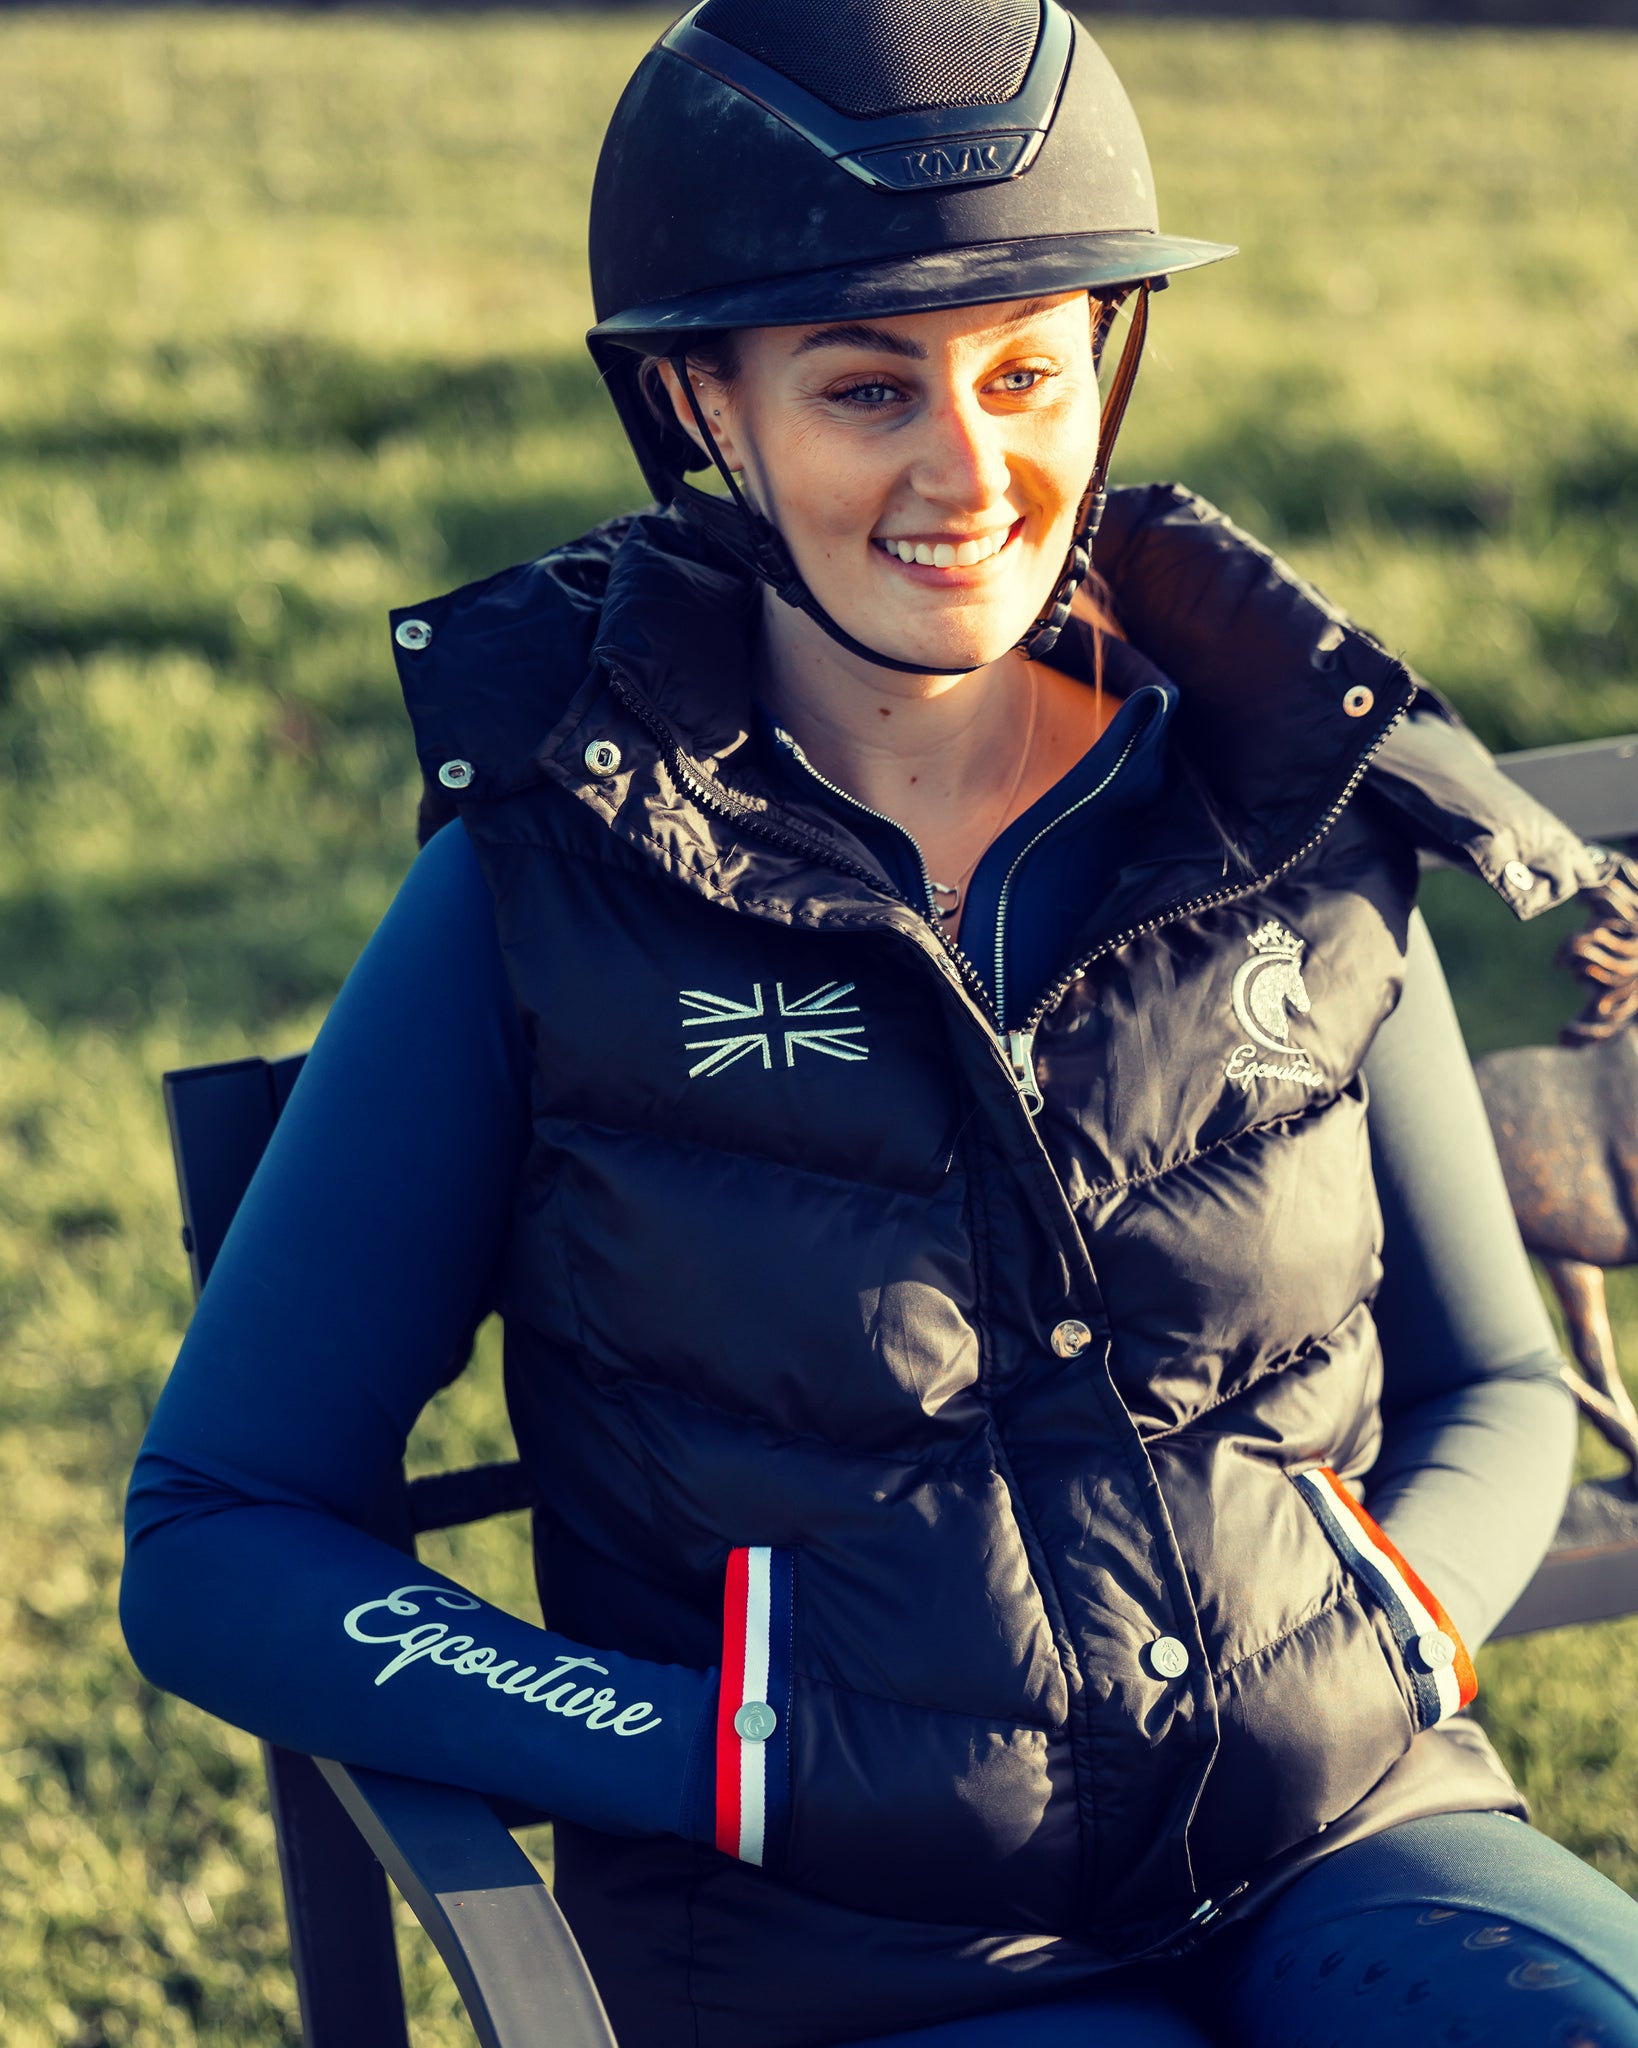 5 Equestrian Things To Get You Through The Winter Blues